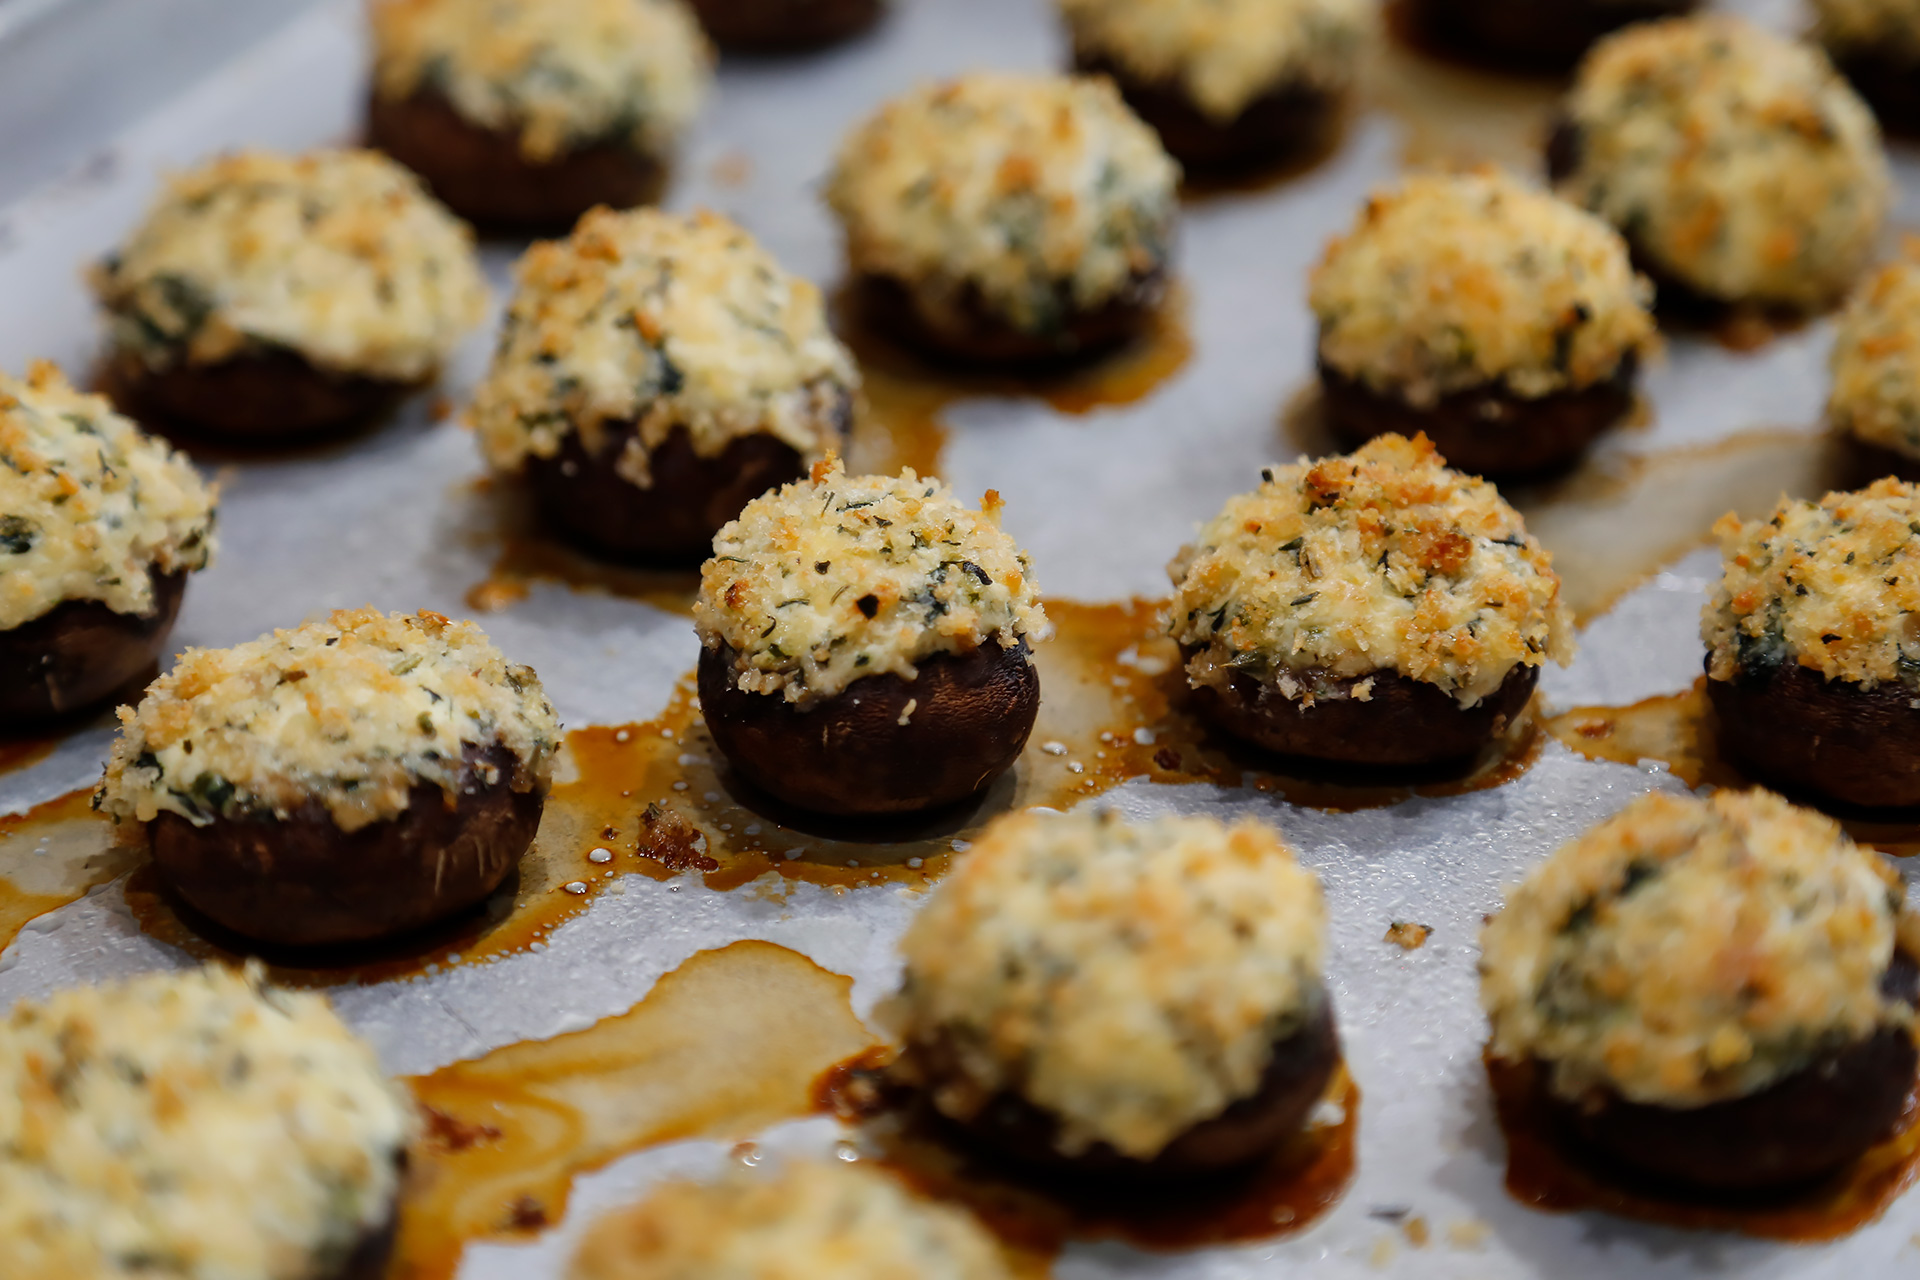 Fresh baked Cheese and Spinach Stuffed Mushrooms with Crispy Herbed Breadcrumbs.